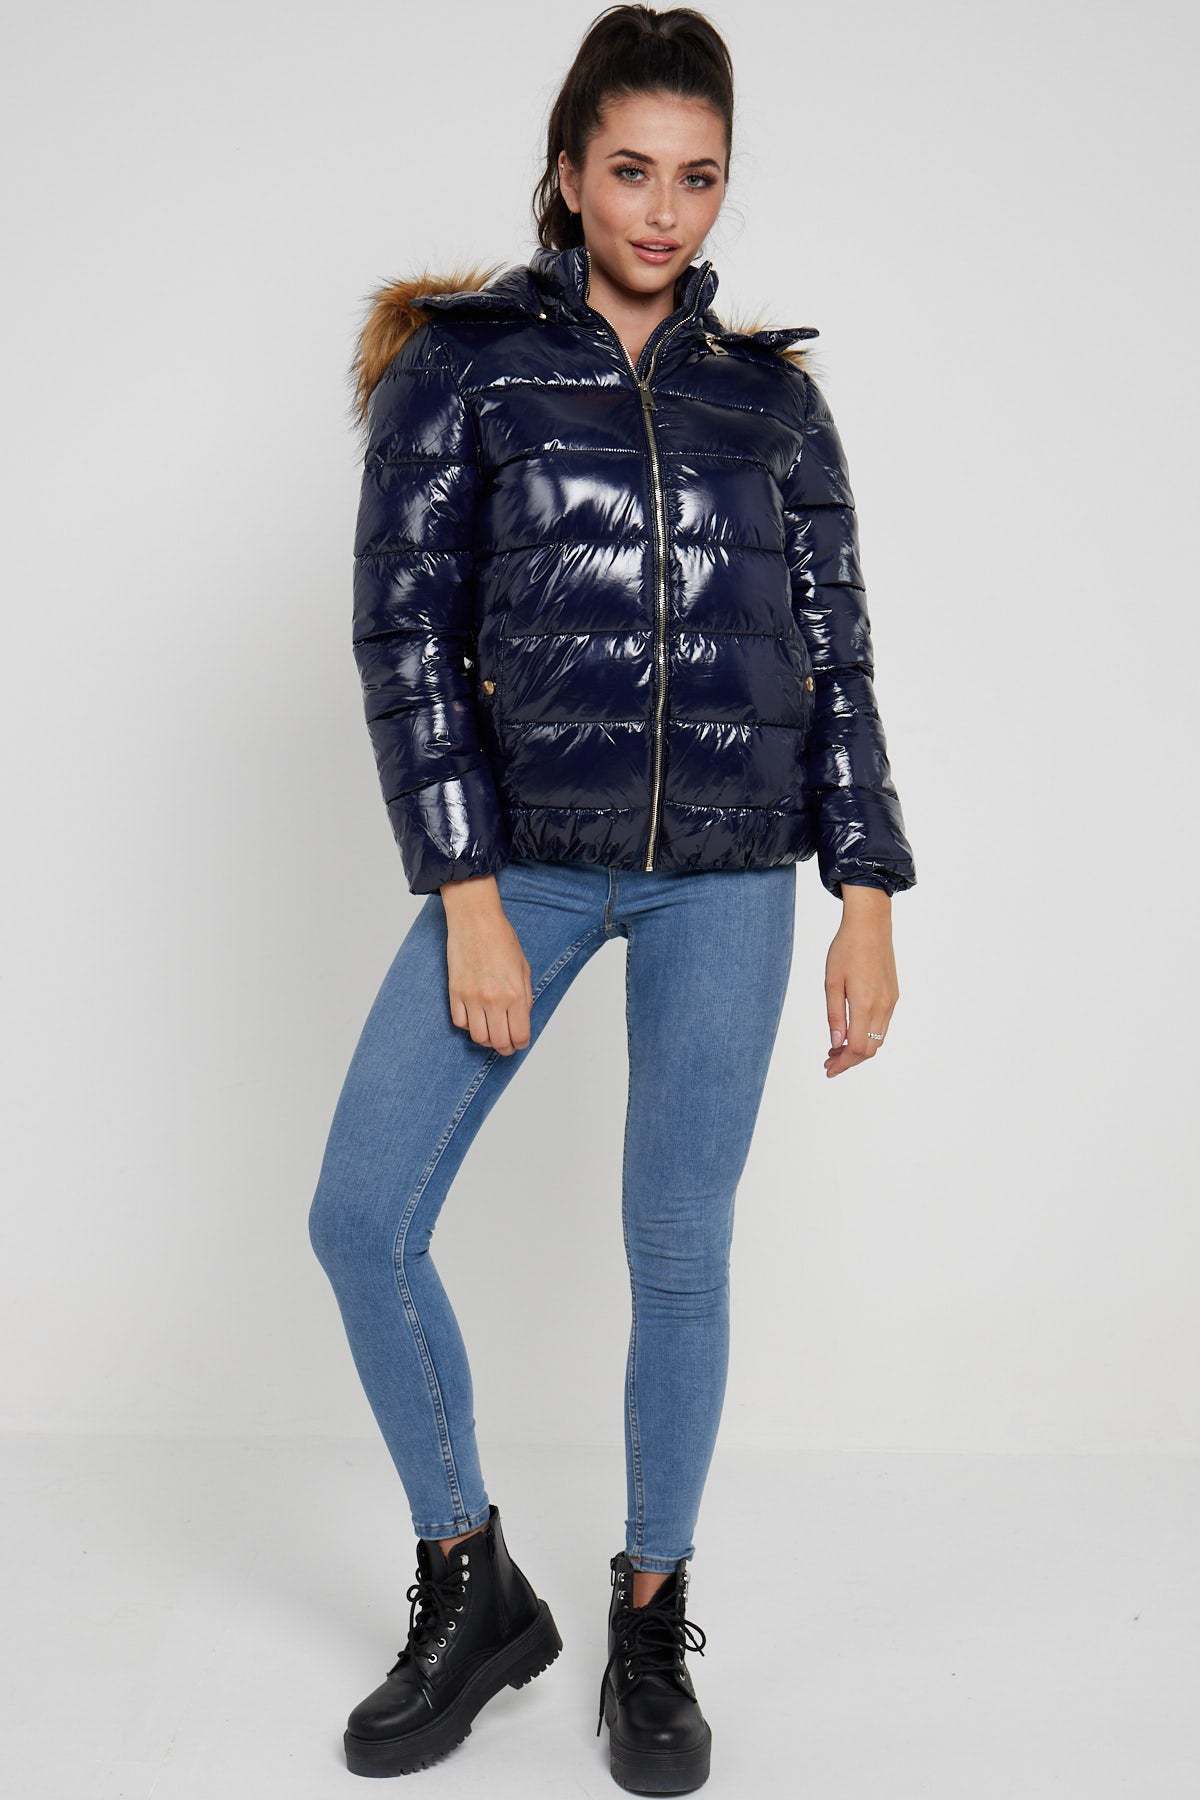 Love Sunshine Wet Look Padded Jacket with Faux Fur Hood in Shiny Navy LS-6042